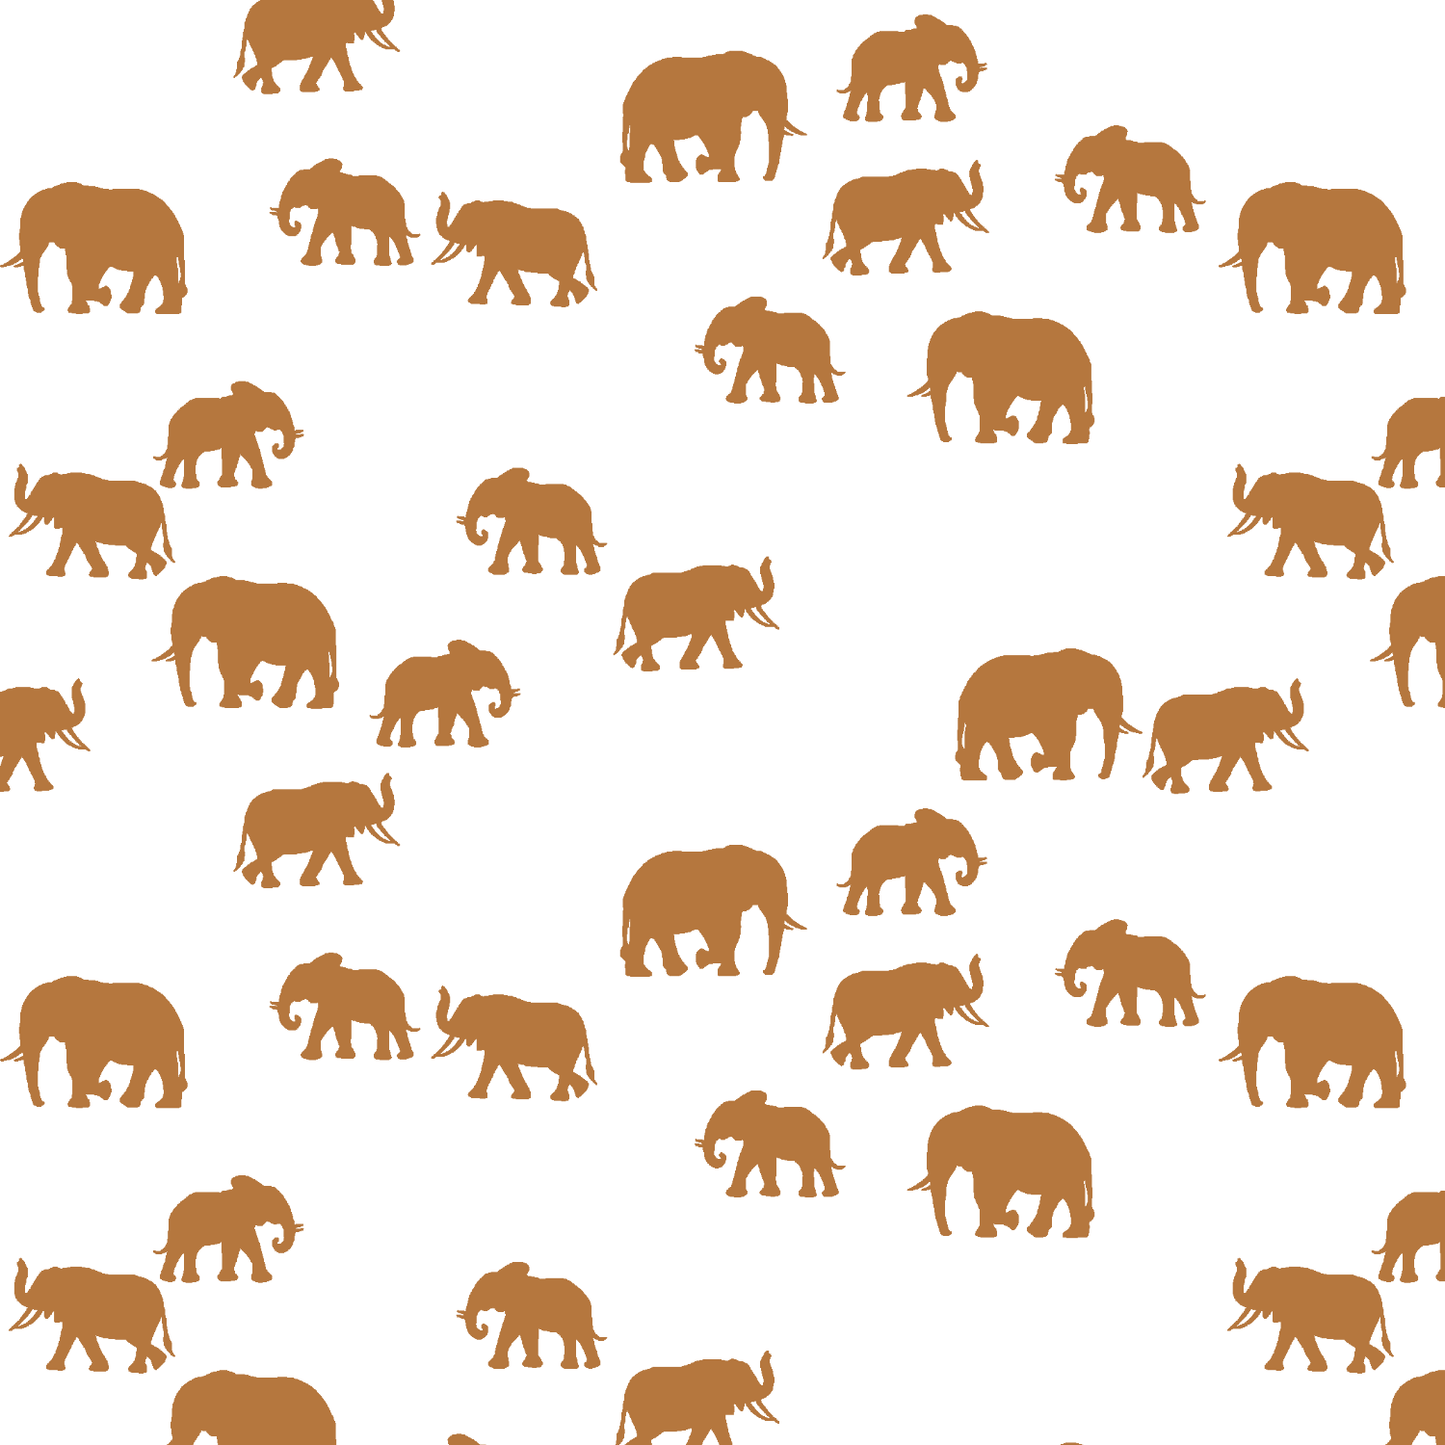 Elephant Silhouette in Ginger on White